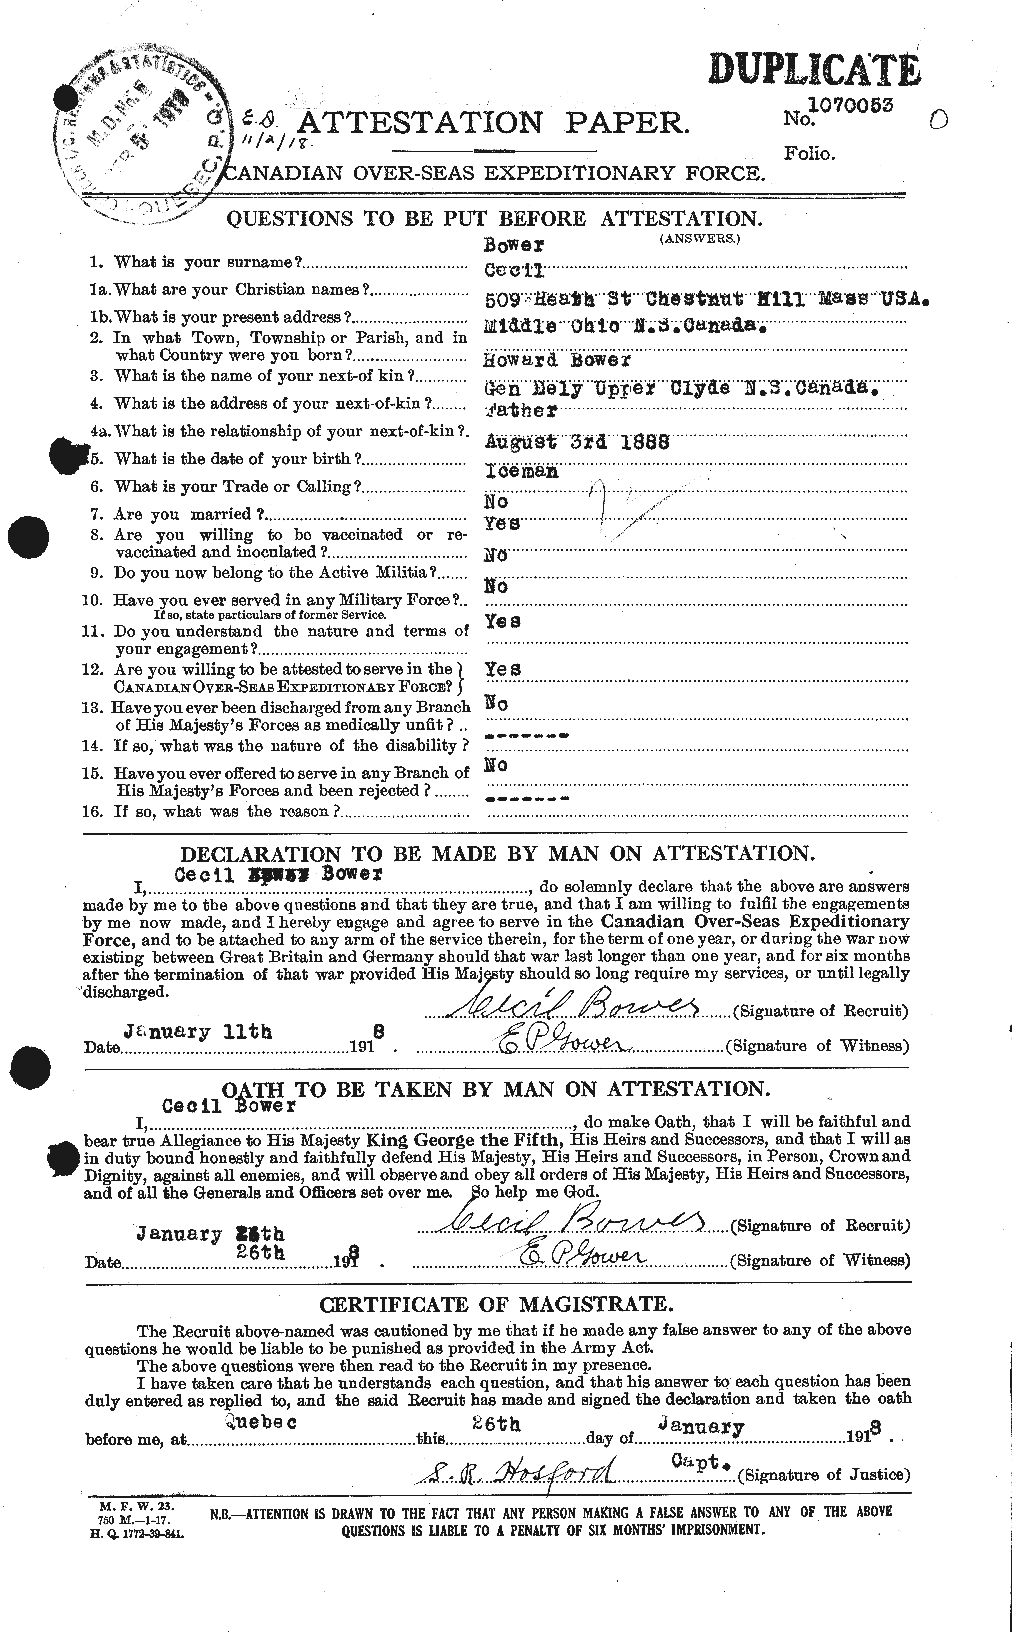 Personnel Records of the First World War - CEF 256718a